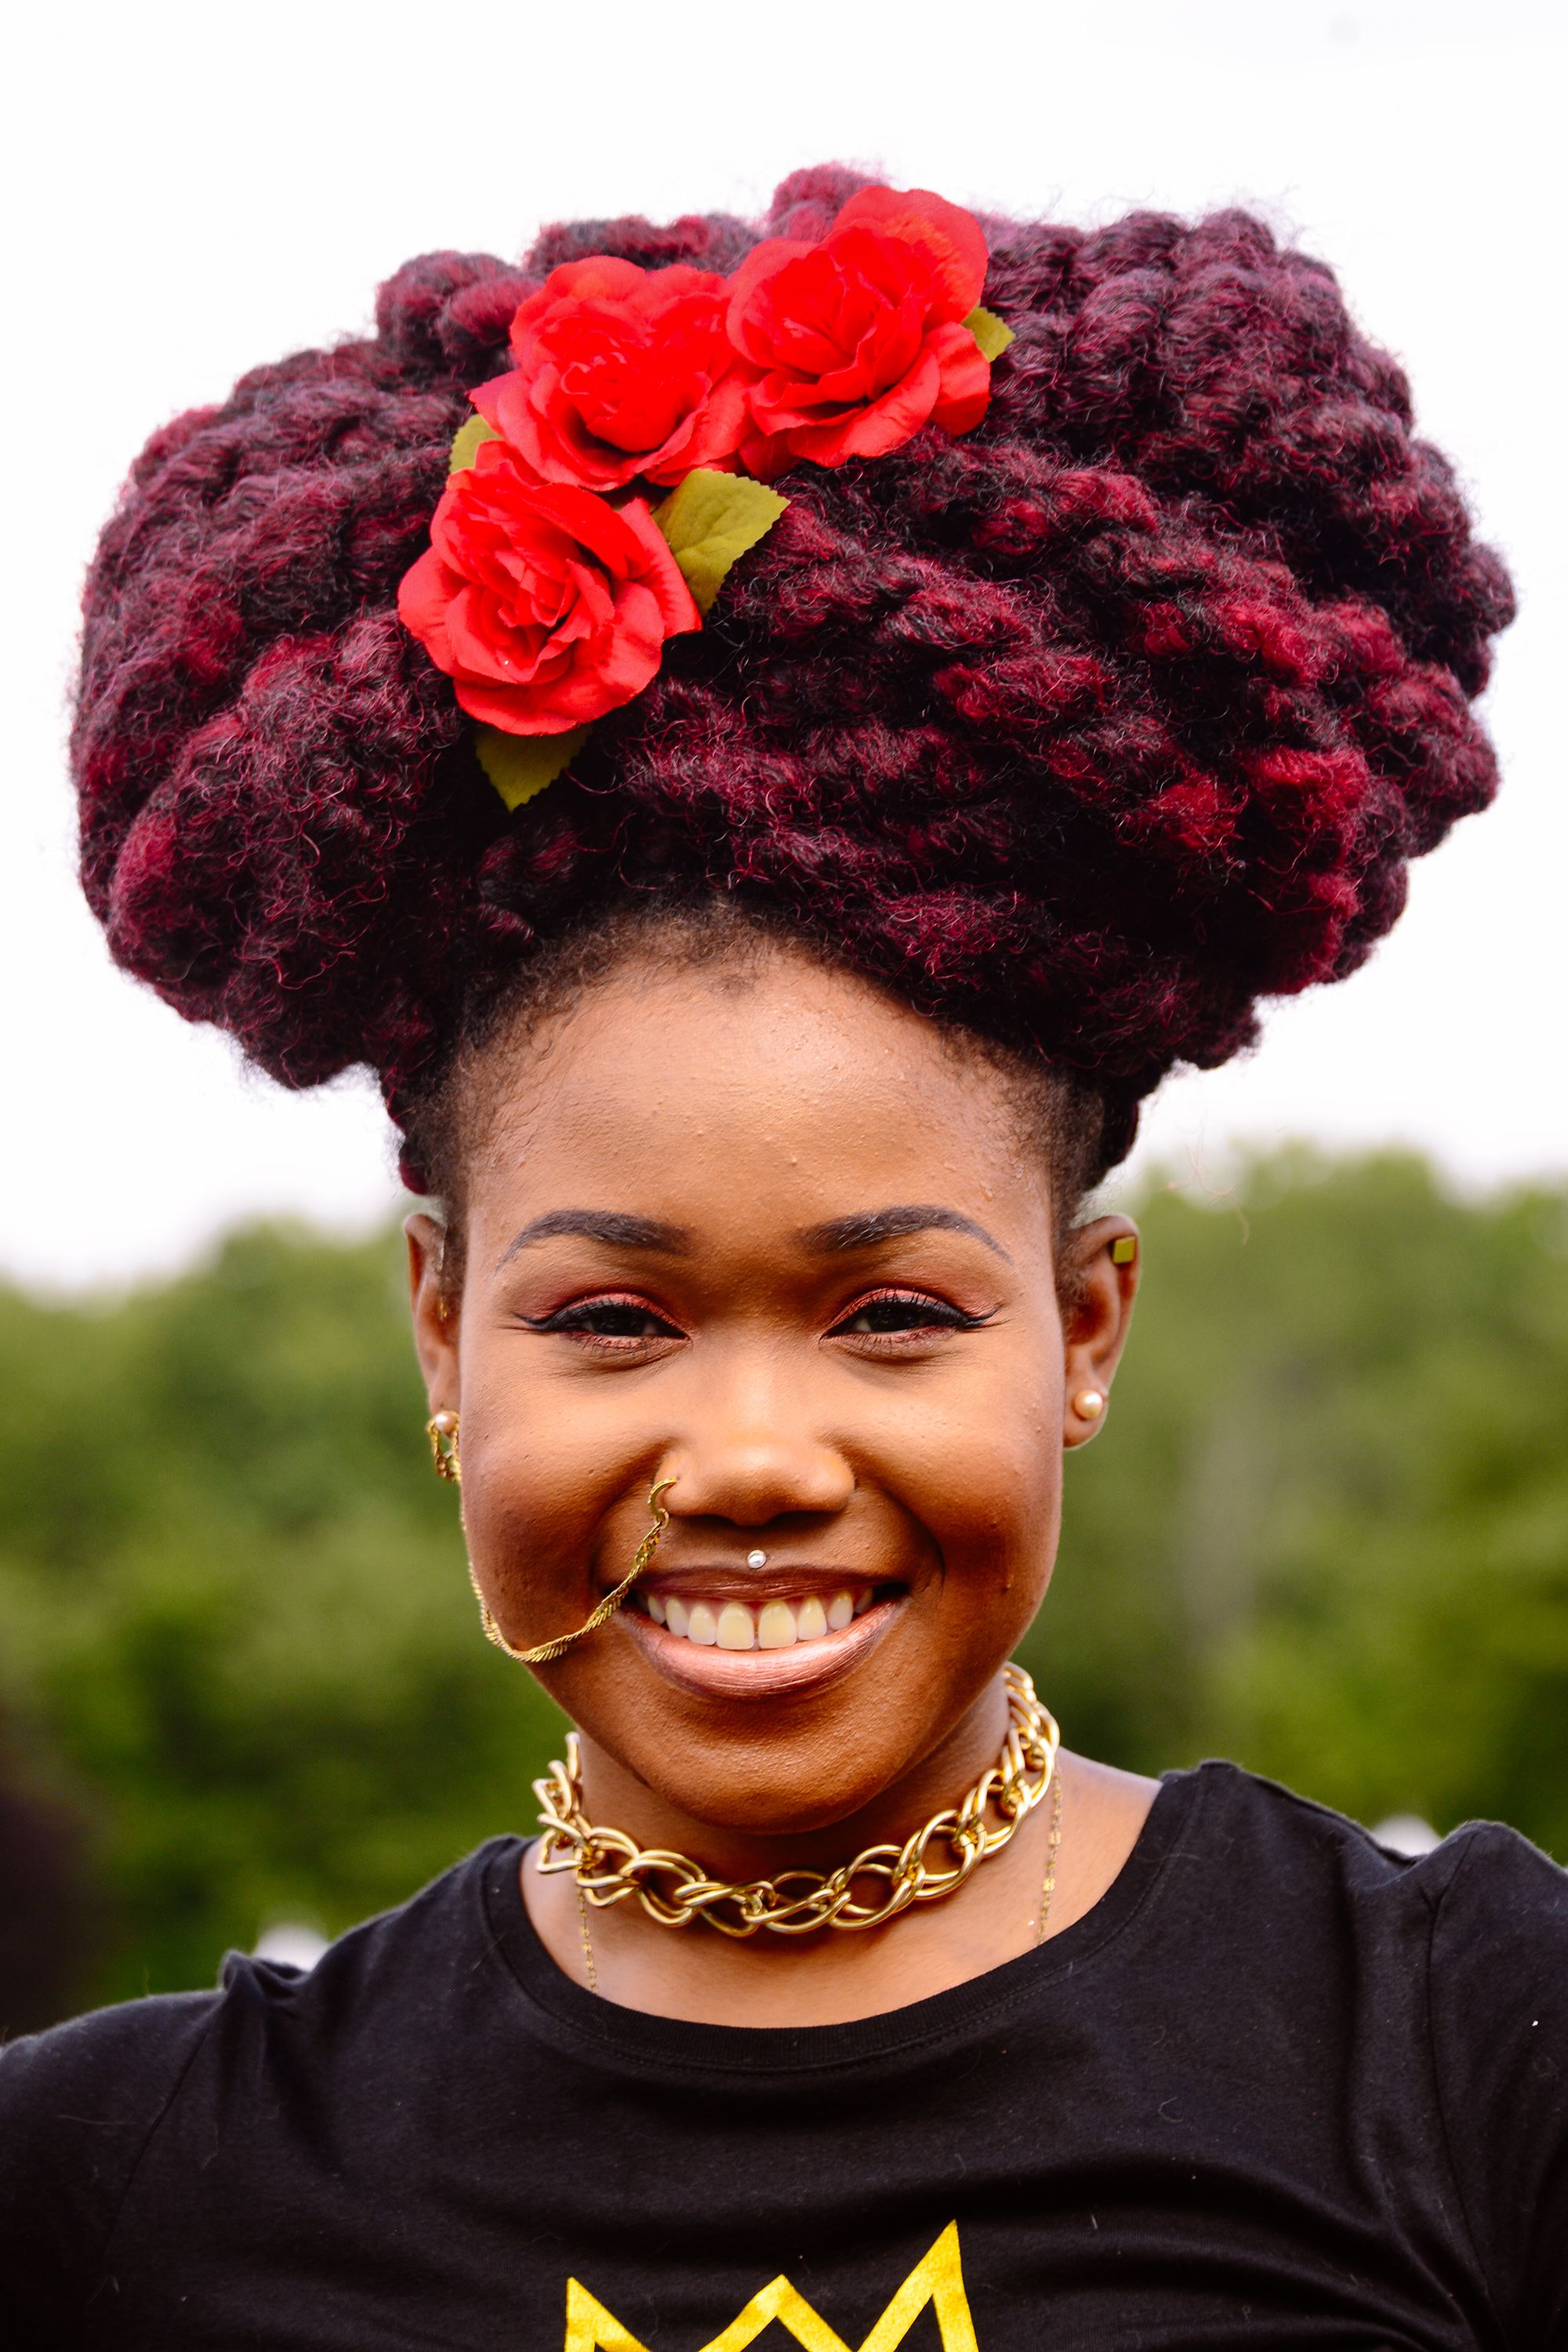 the biggest hair trend at curlfest had nothing to do with curls